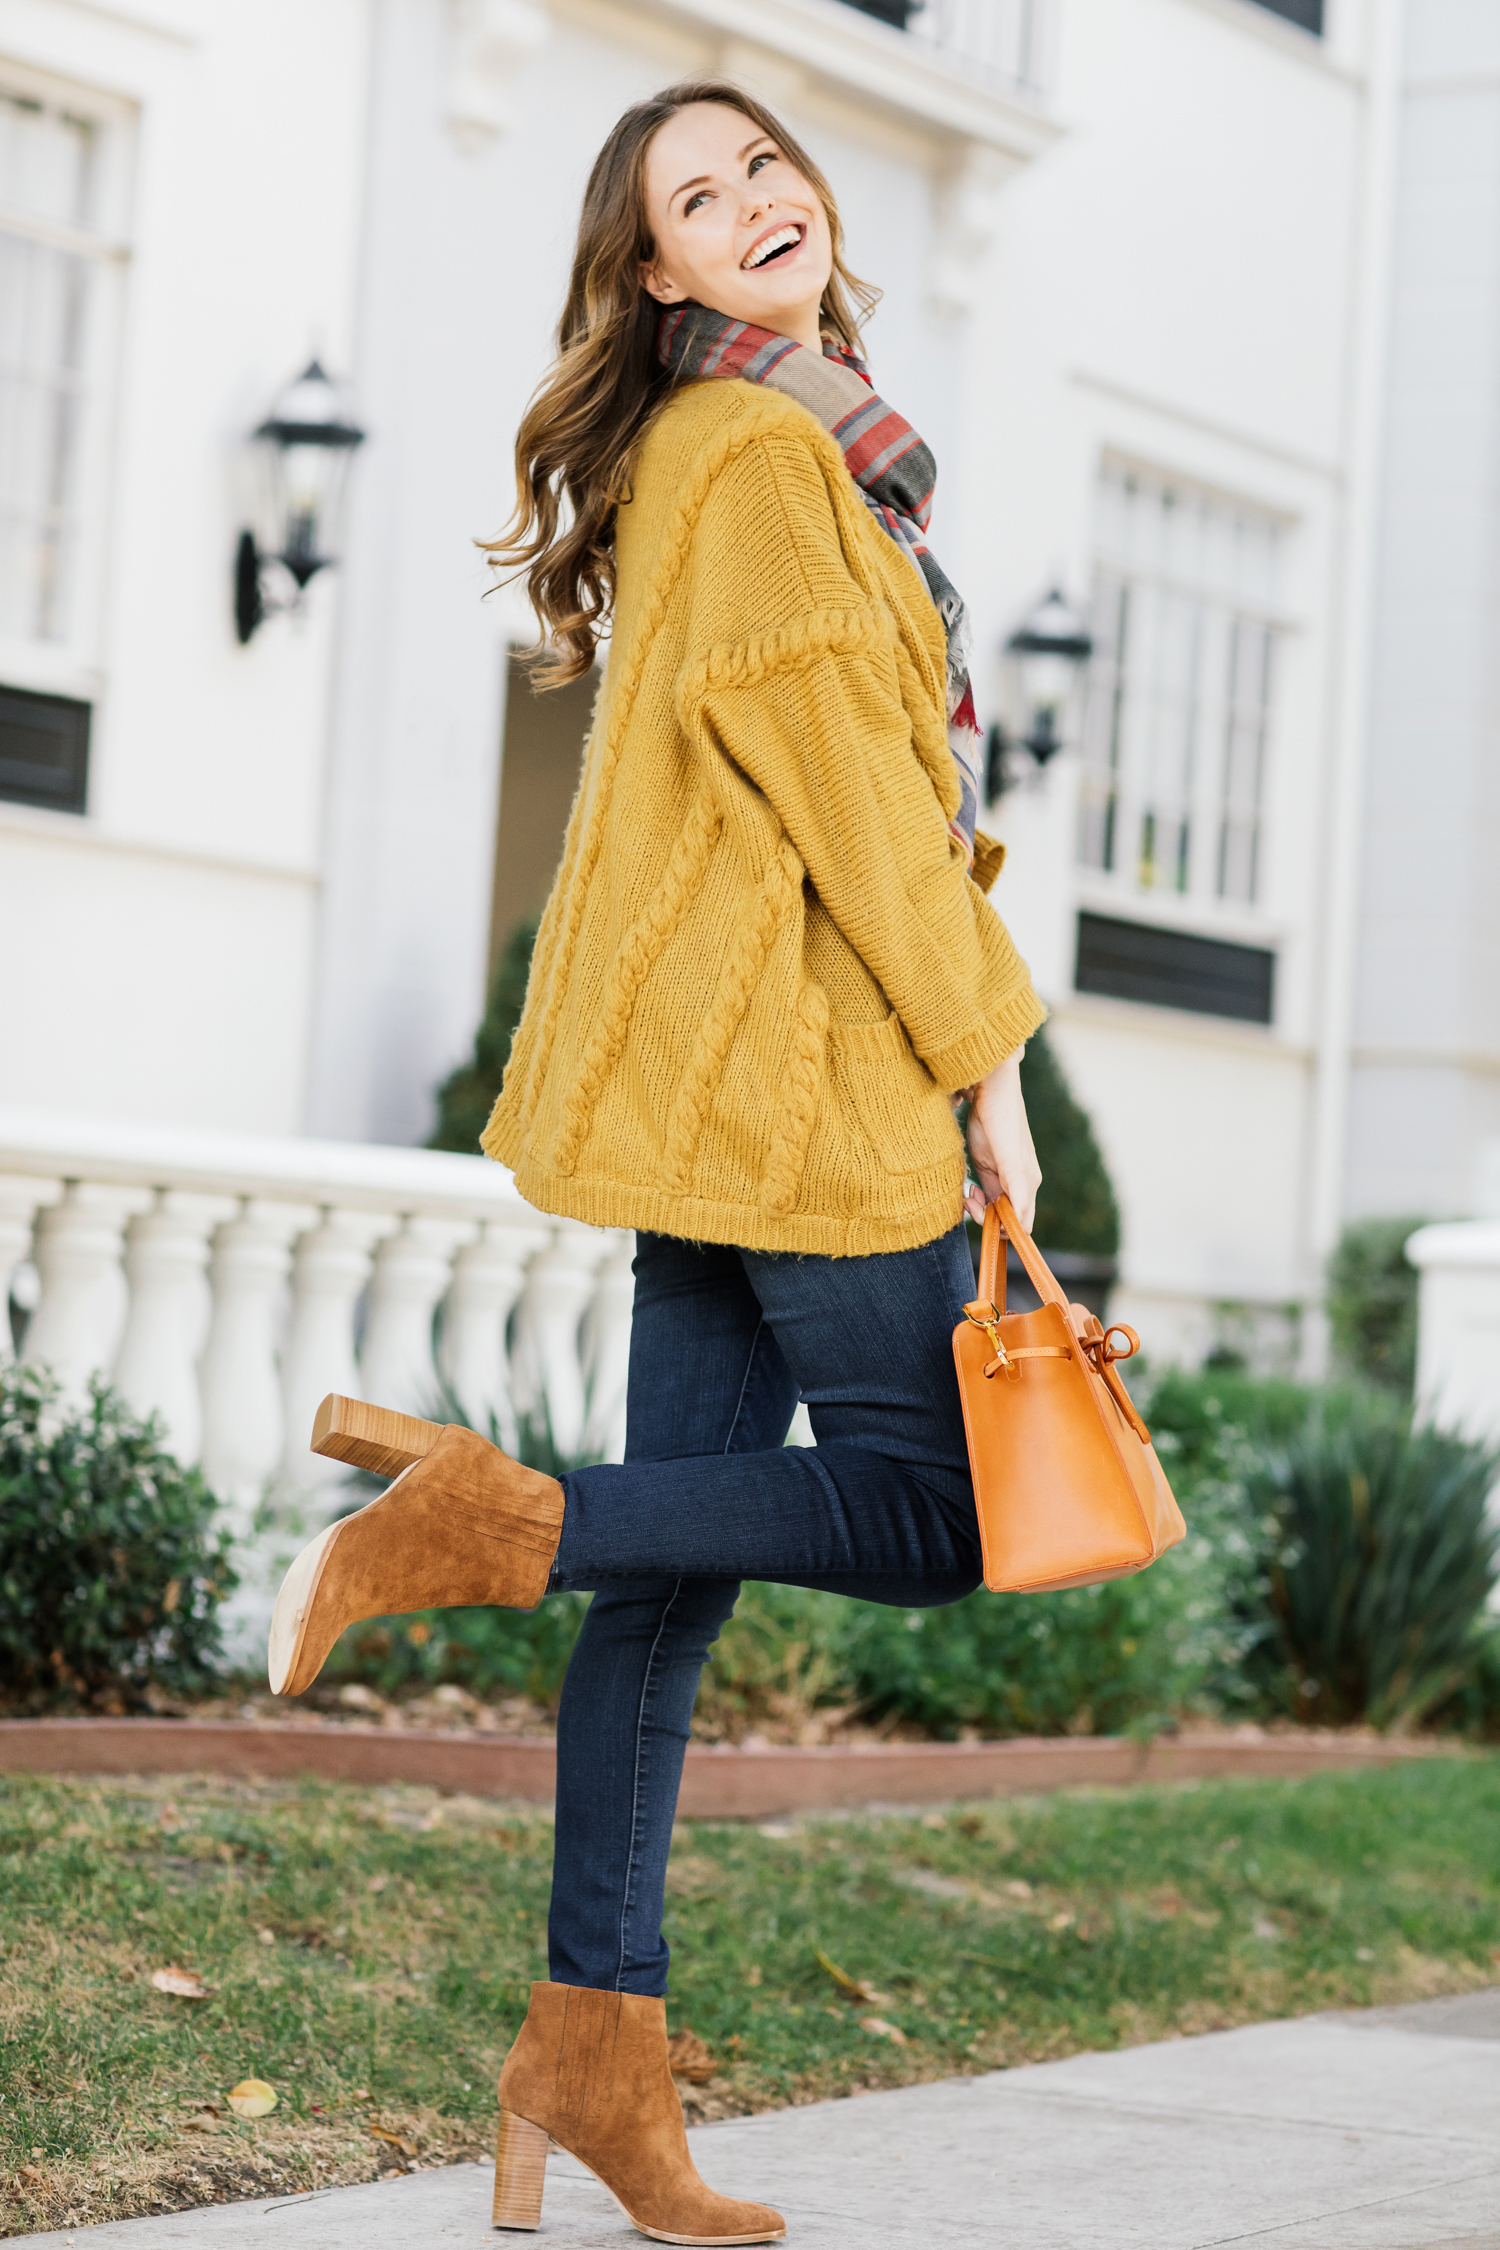 Alyssa Campanella of The A List blog wearing a cozy yellow cardigan and Joie Yara boots for fall